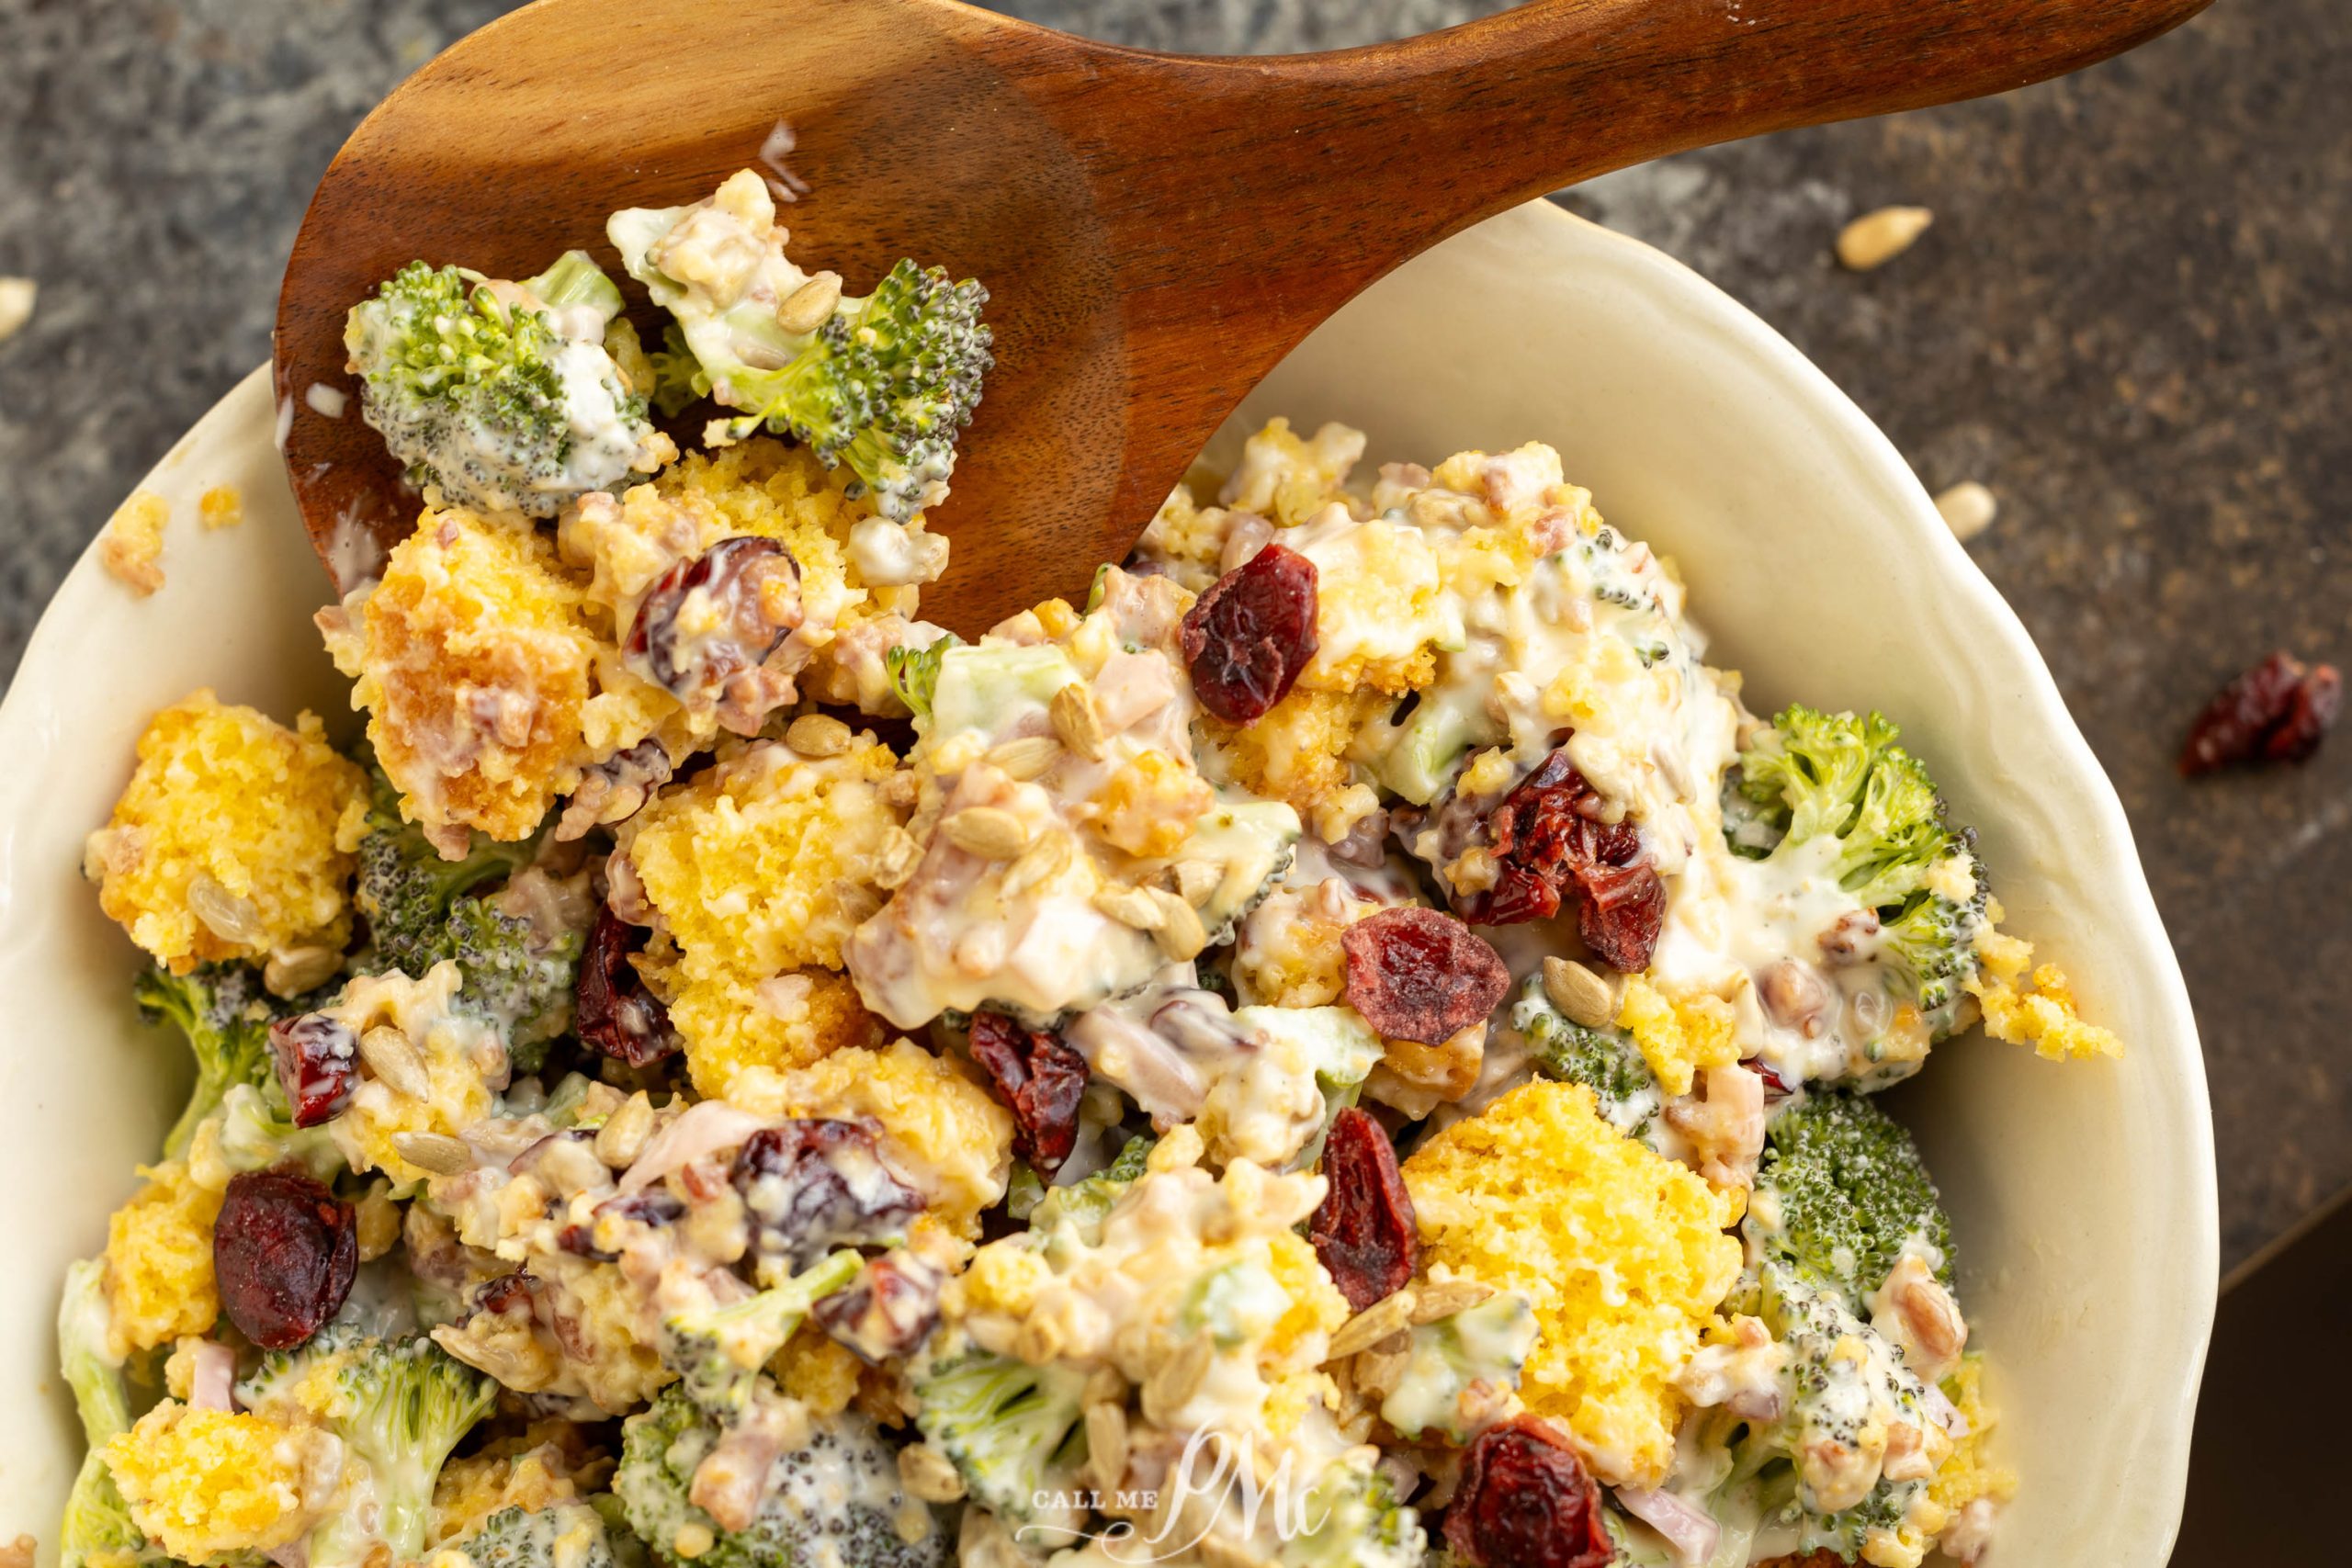 A bowl of broccoli and cauliflower salad with cranberries and nuts, mixed with a creamy dressing, and a wooden serving spoon.